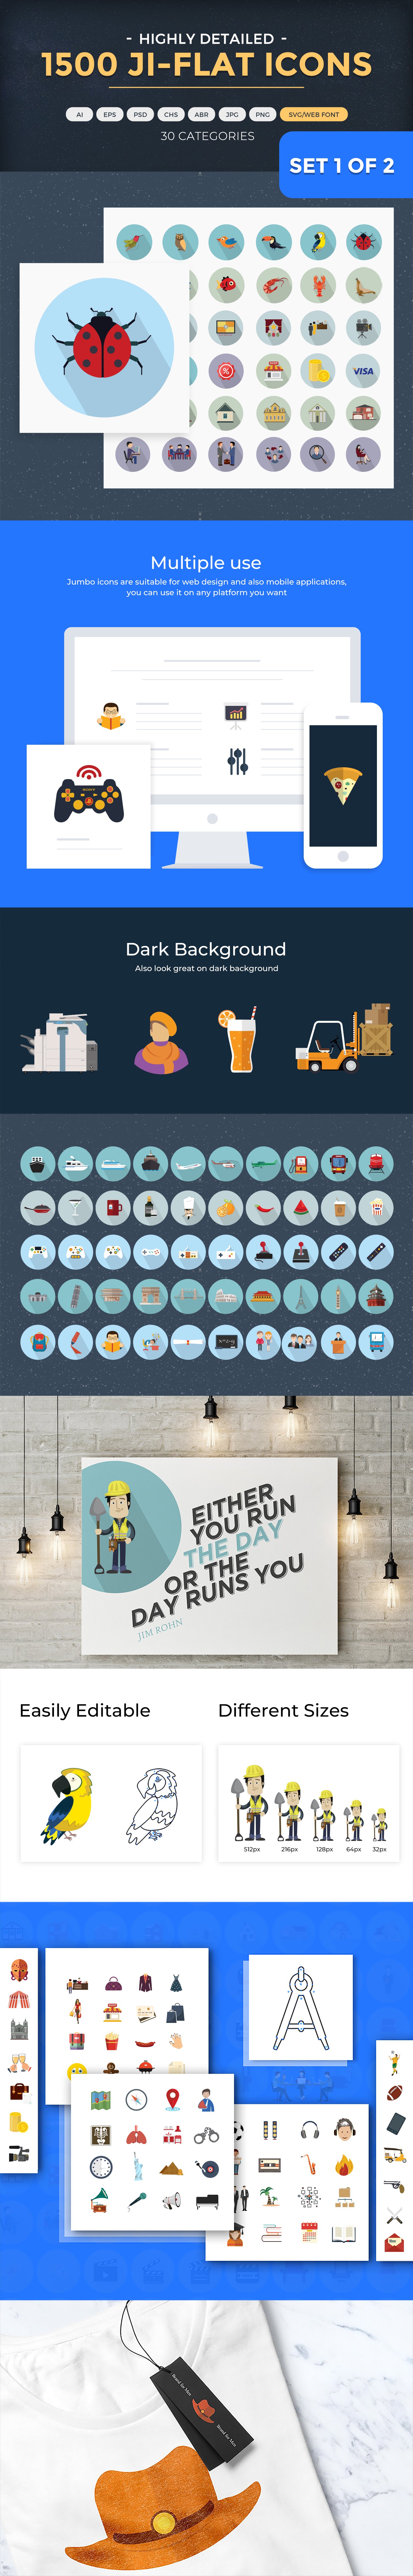 marketing images flat vector icons refined 117